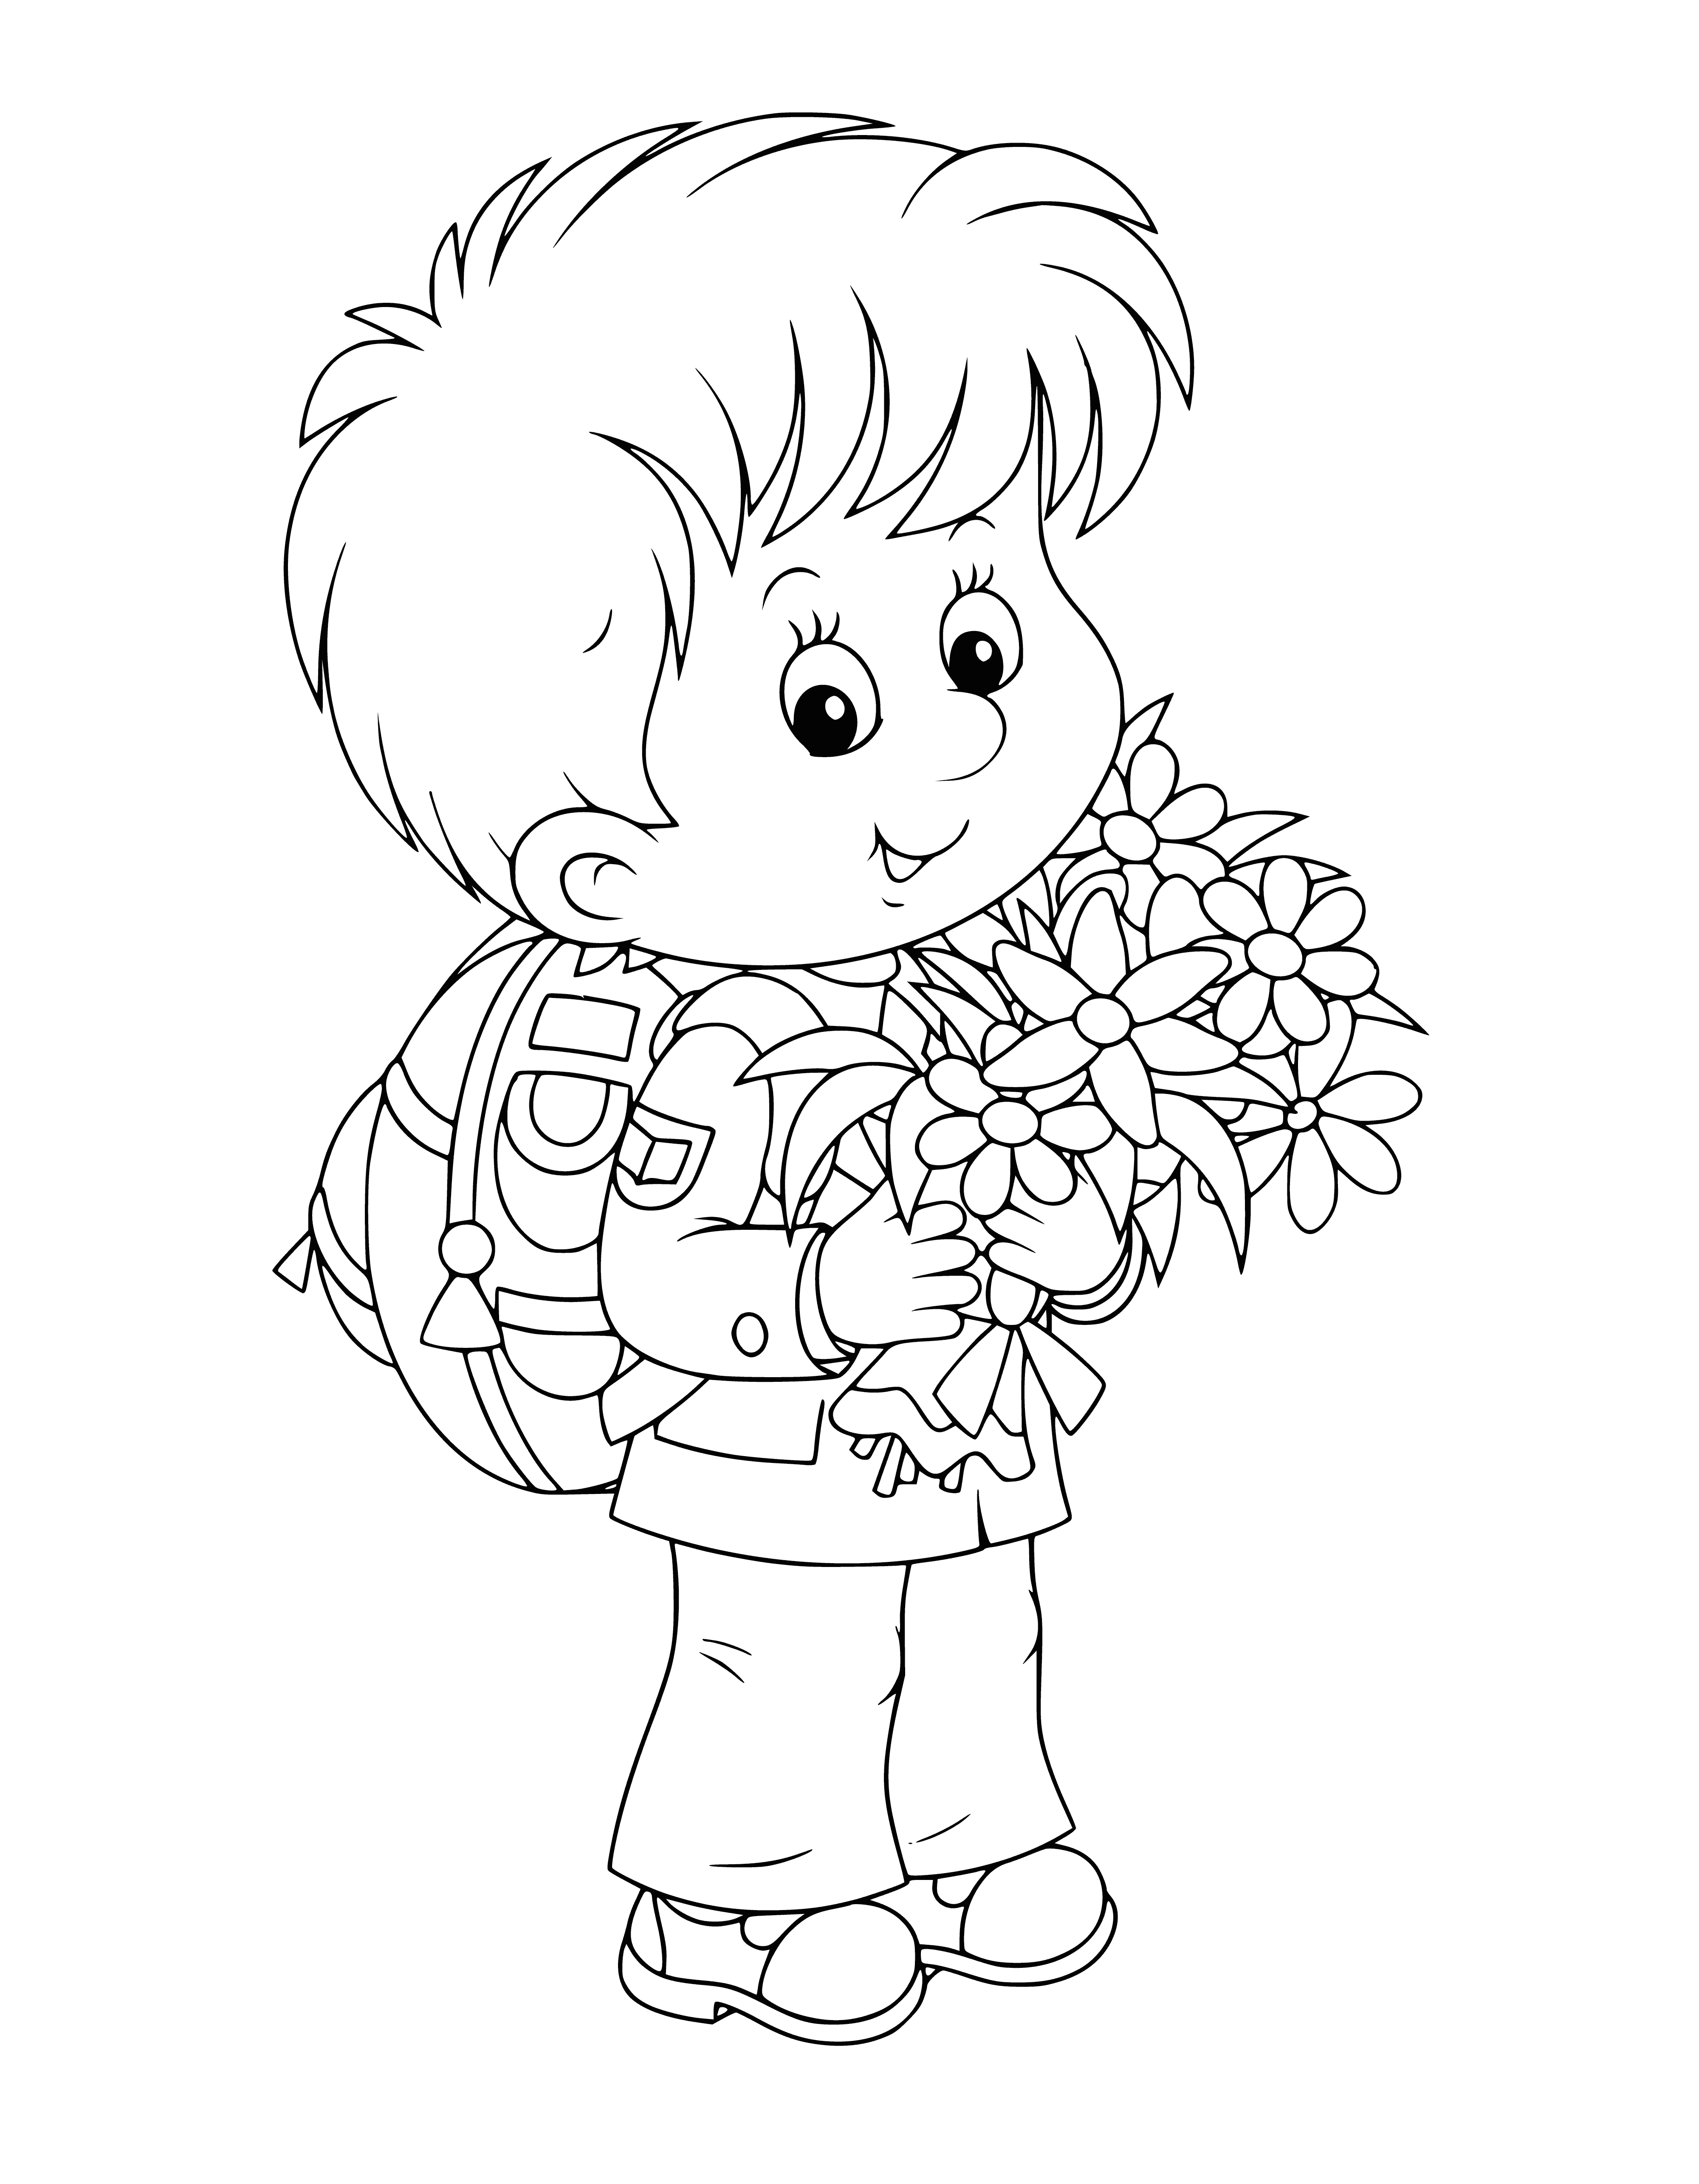 September 1 coloring page